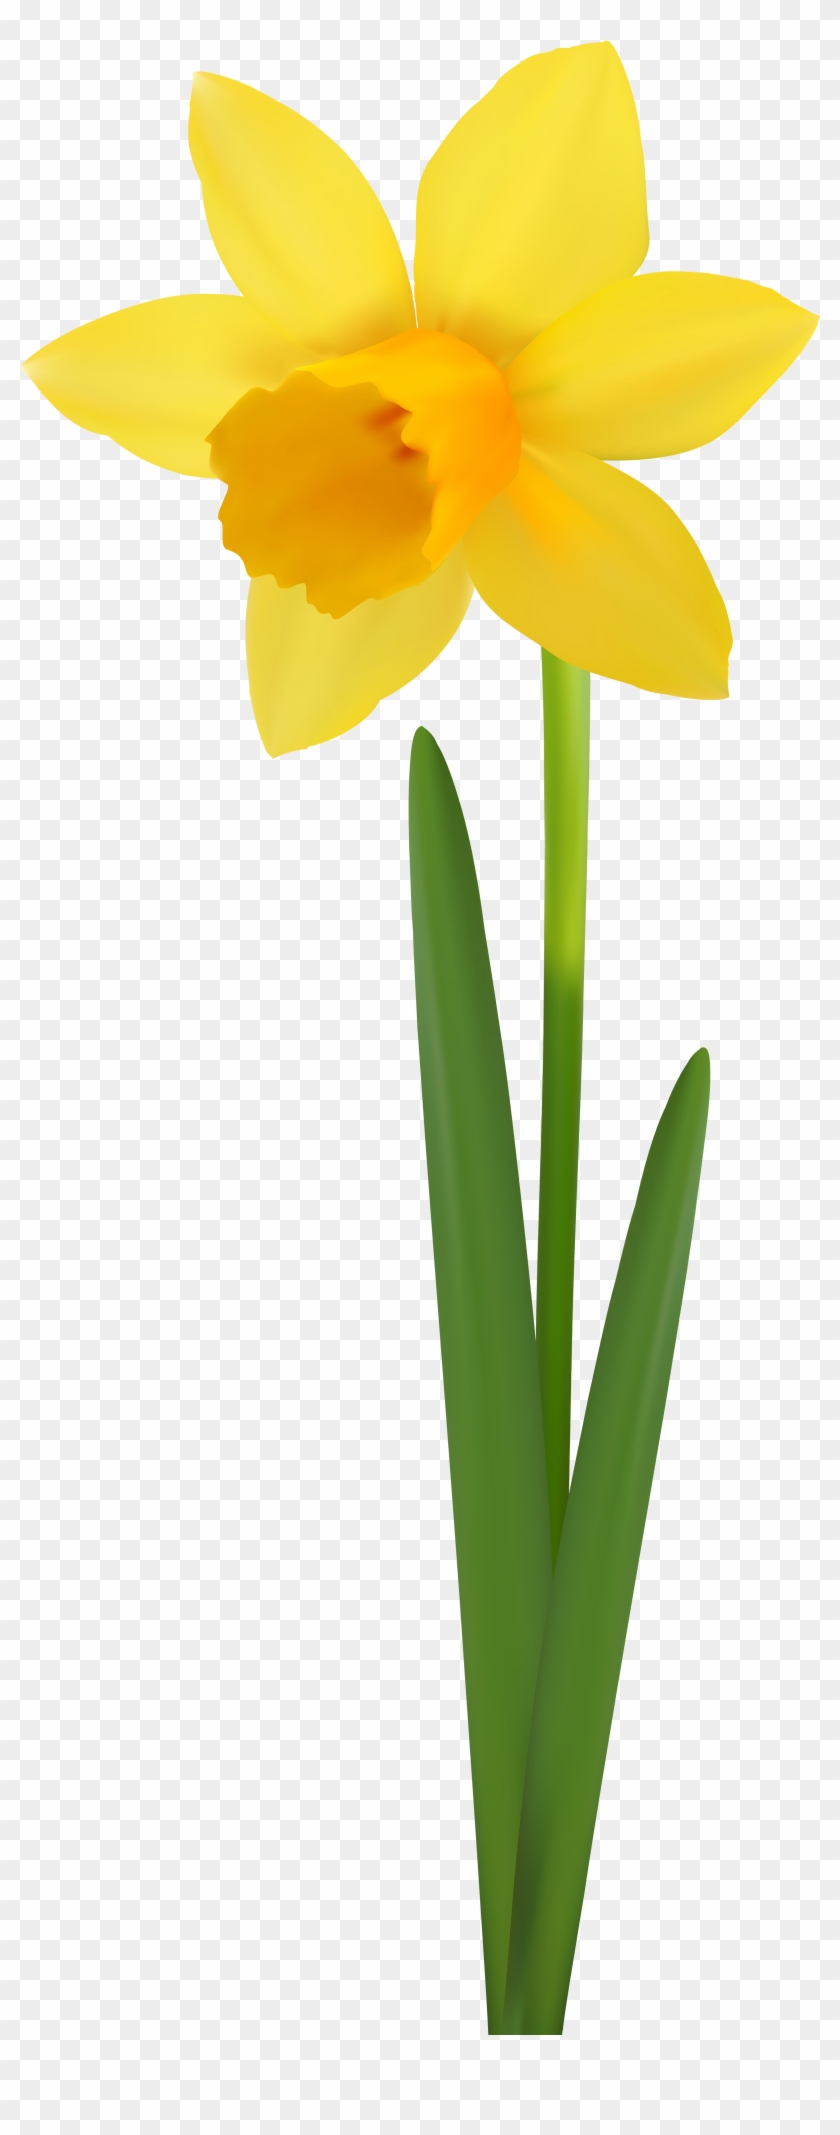 Daffodil Flower Transparent Image - Narcissus Clipart #1654579